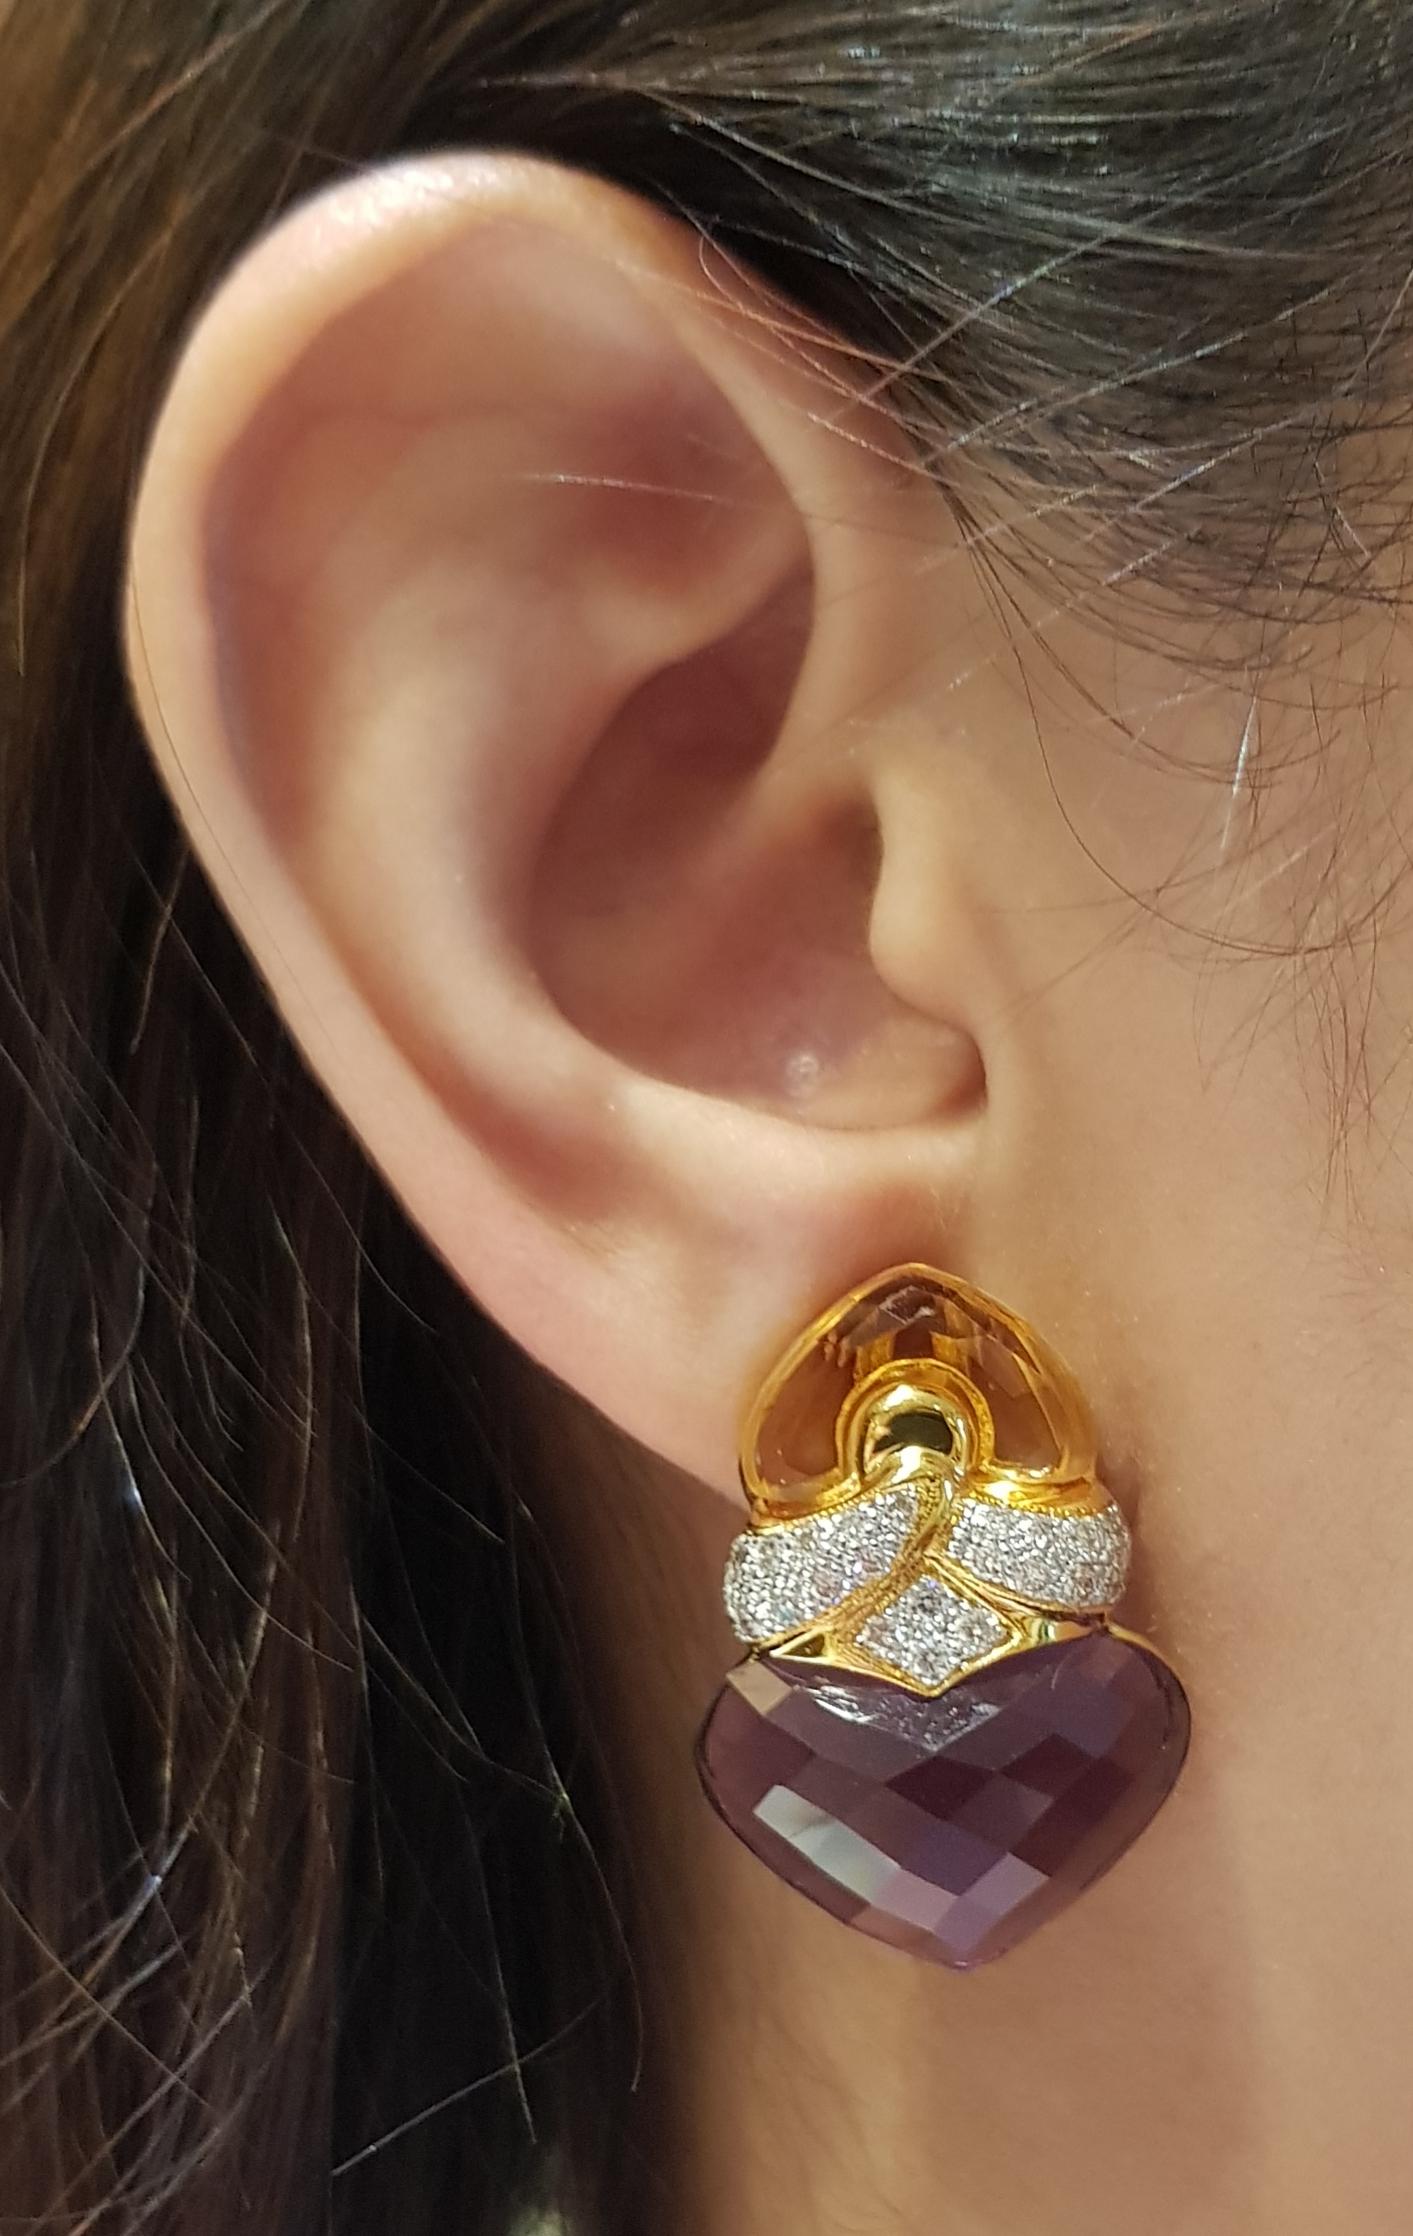 Citrine 7.13 carats, Amethyst 27.34 carats with Diamond 1.01 carat Earrings set in 18 Karat Gold Settings

Width:  2.2 cm 
Length:  3.0 cm
Total Weight: 18.83 grams

